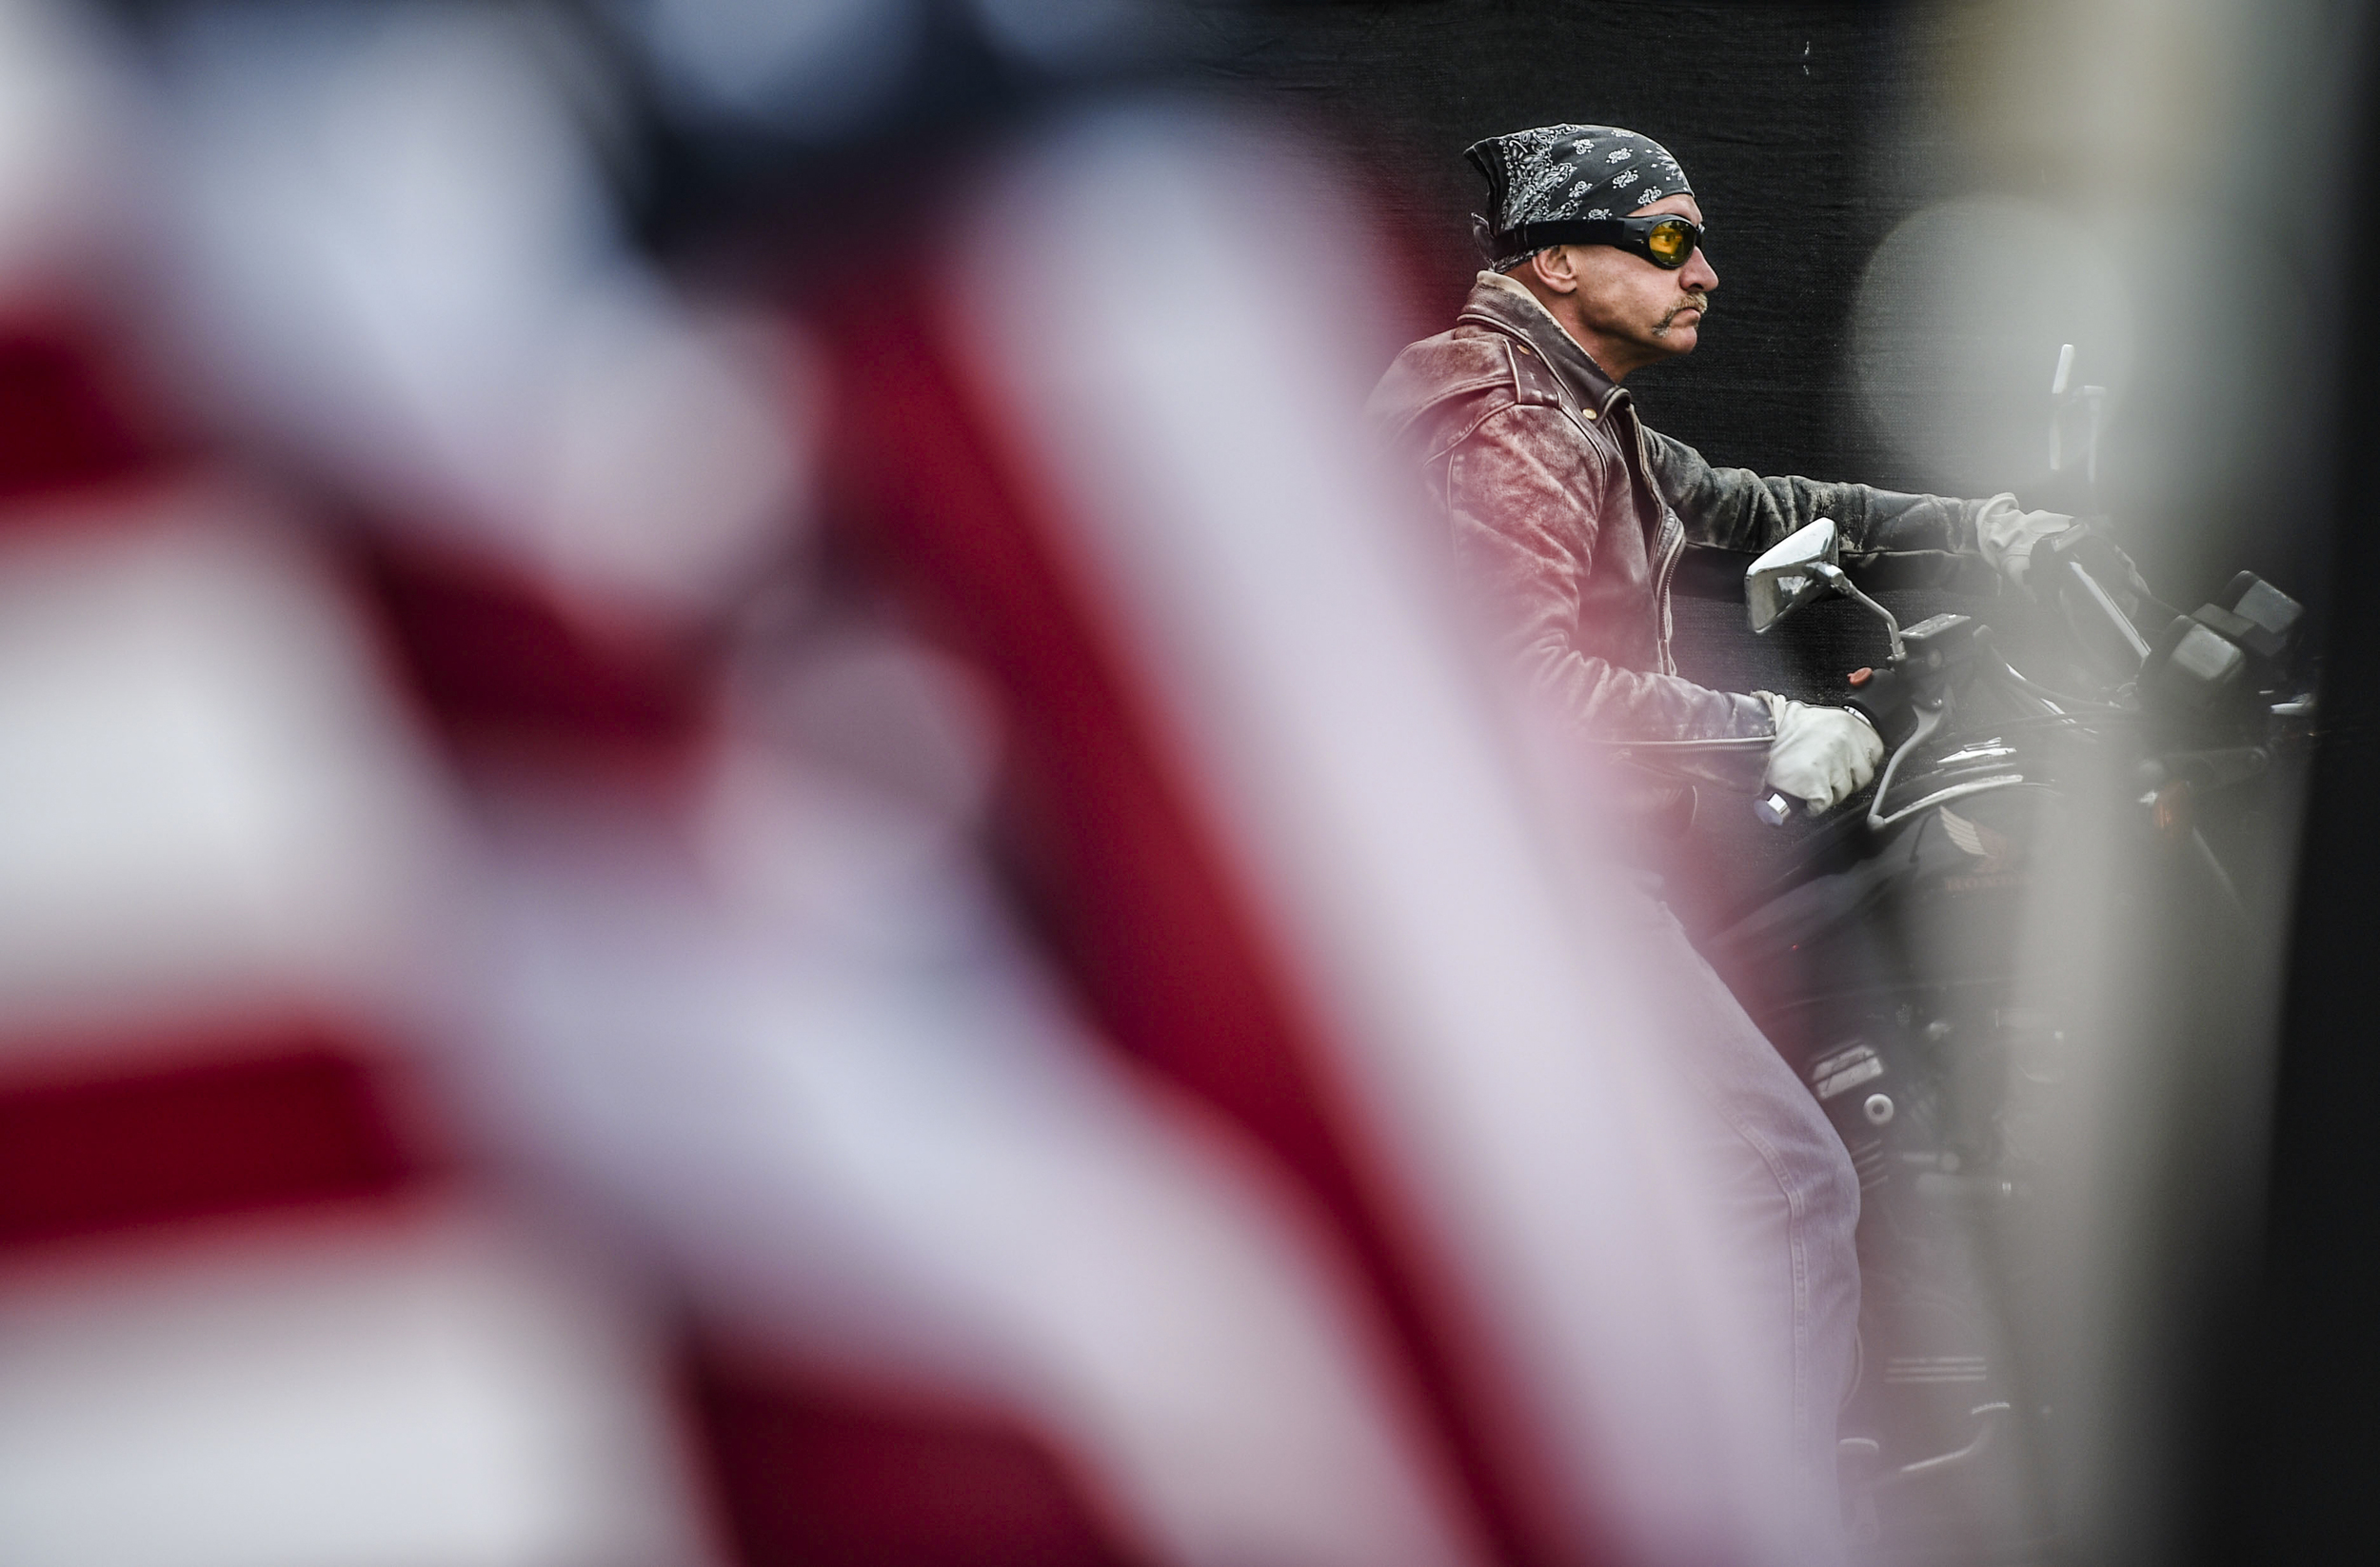  A member of the Patriot Guard Motorcade rides his motorcycle with police and fire agencies to raise the flag in honor of Wounded Warriors, at the Gerald R. Ford Presidential Museum Thursday, Sept. 10, 2015, in Grand Rapids, Mich.&nbsp; 